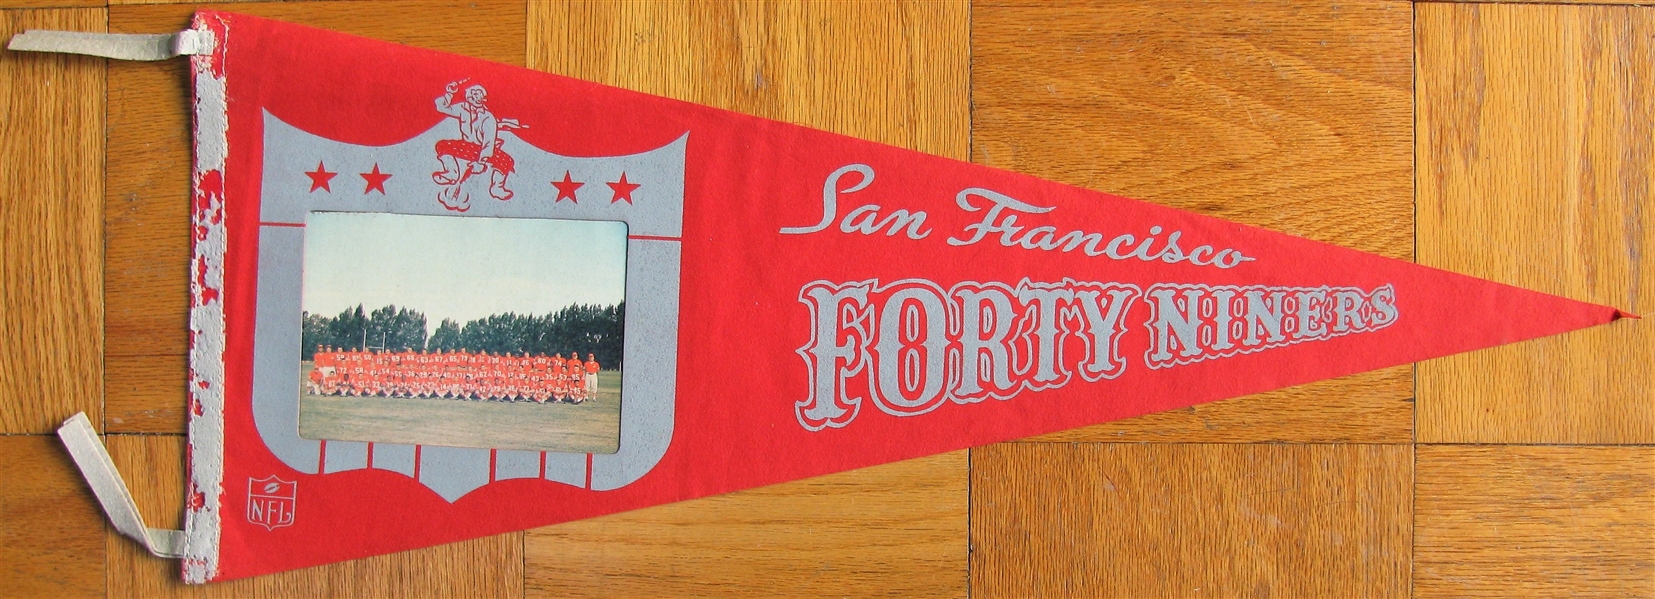 60's SAN FRANCISCO FORTY-NINERS PHOTO PENNANT